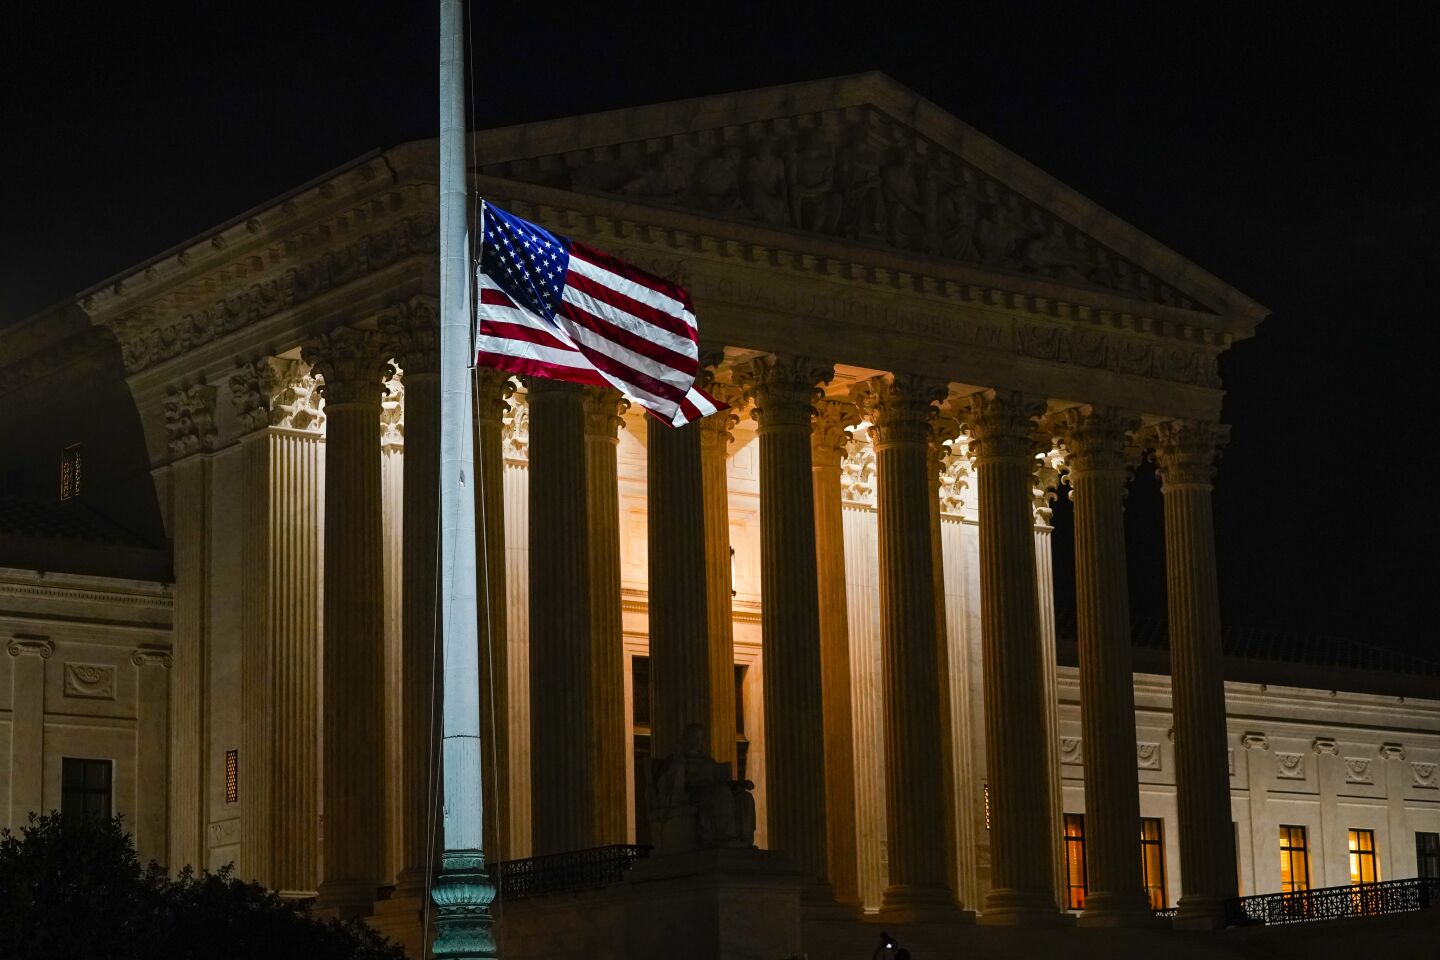 The U.S. flag blows in the wind at half-staff at night in front of the Supreme Court building